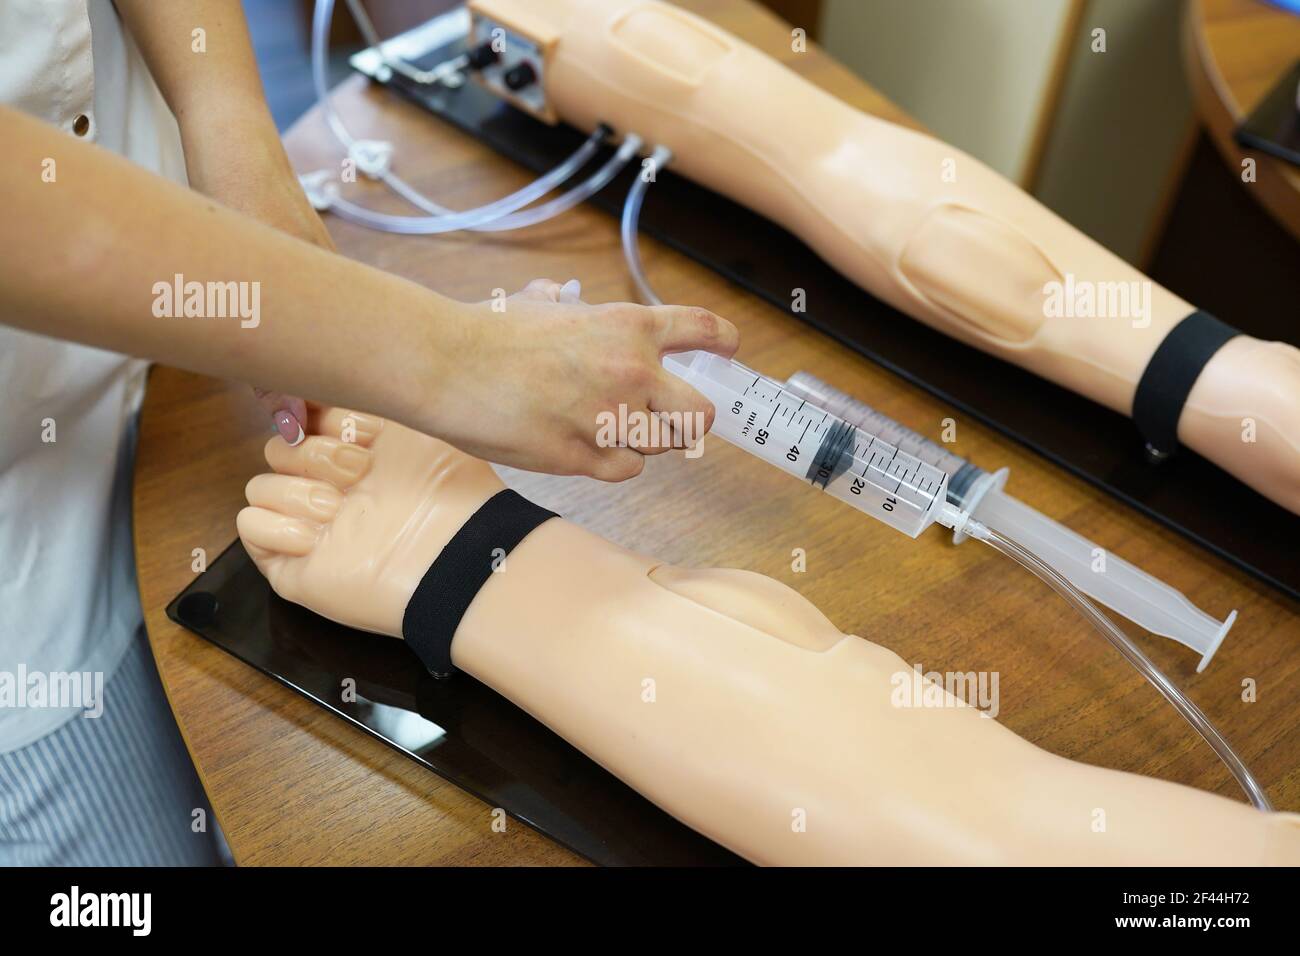 Practical lesson in medicine. workshop medical lessons. Intravenous injection training. Intravenous injection on the mold Stock Photo